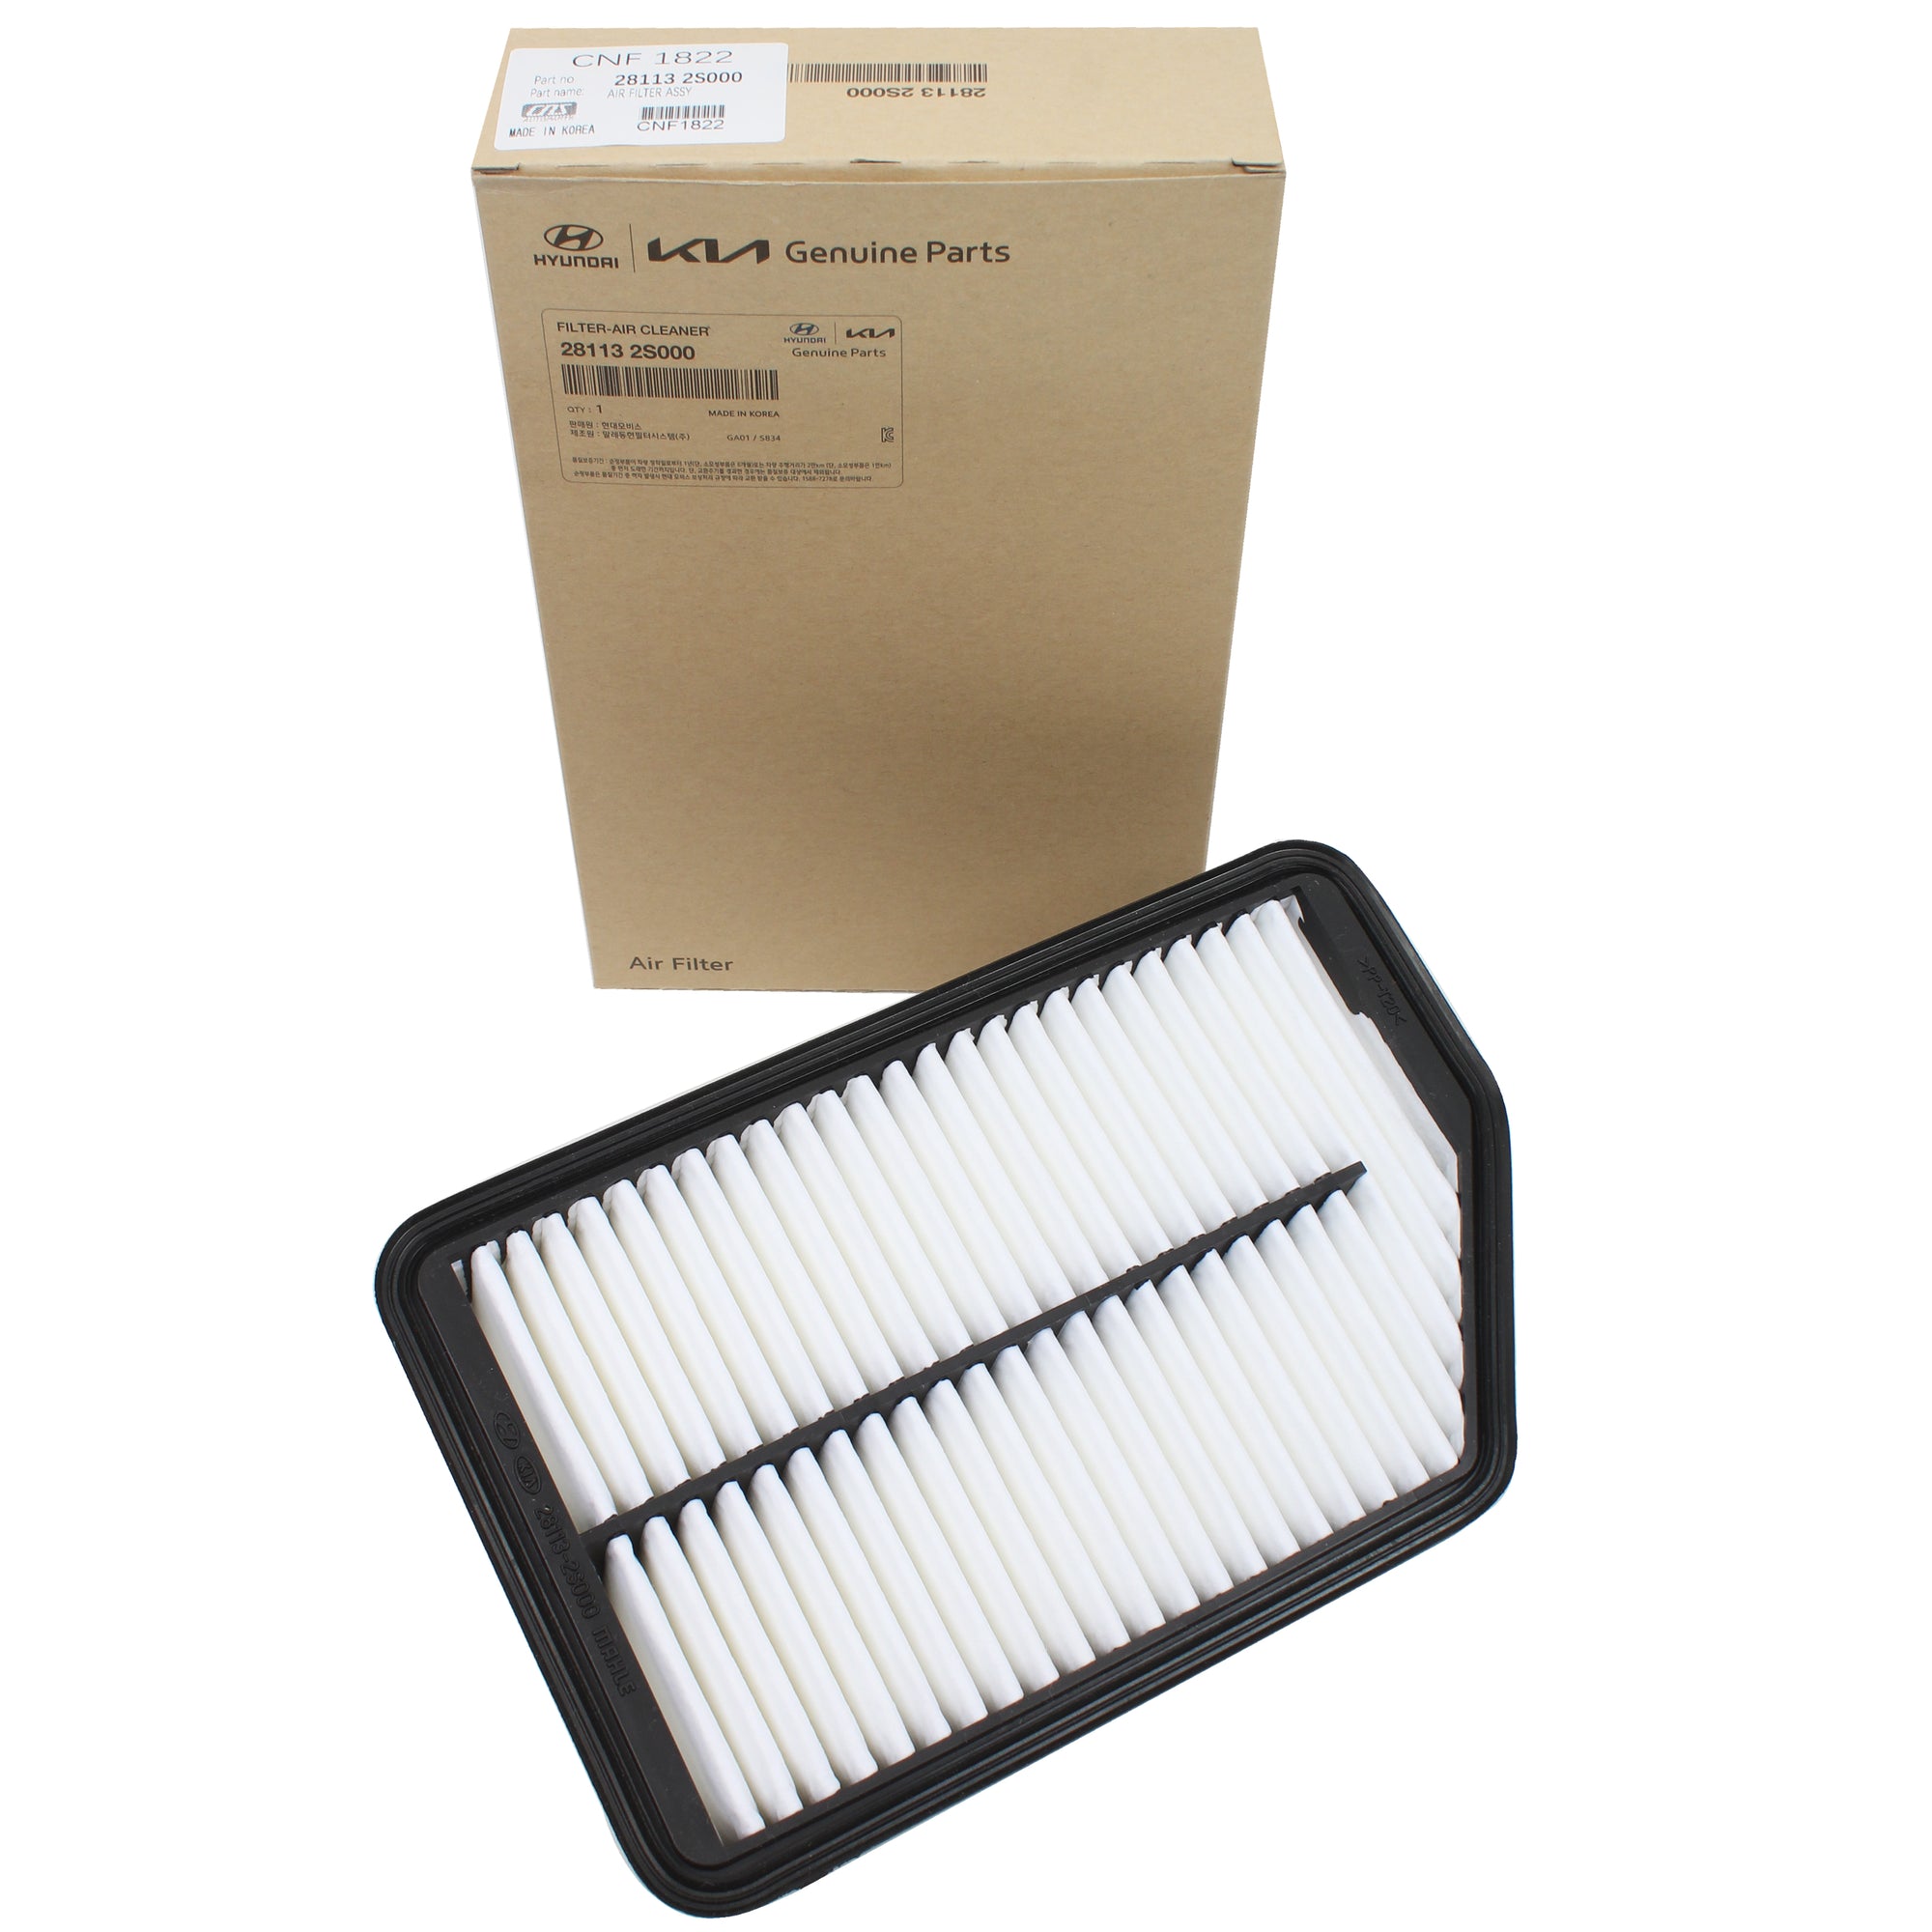 GENUINE Air Filter for 2010-2015Tucson 2011-2016 Sportage 281132S000